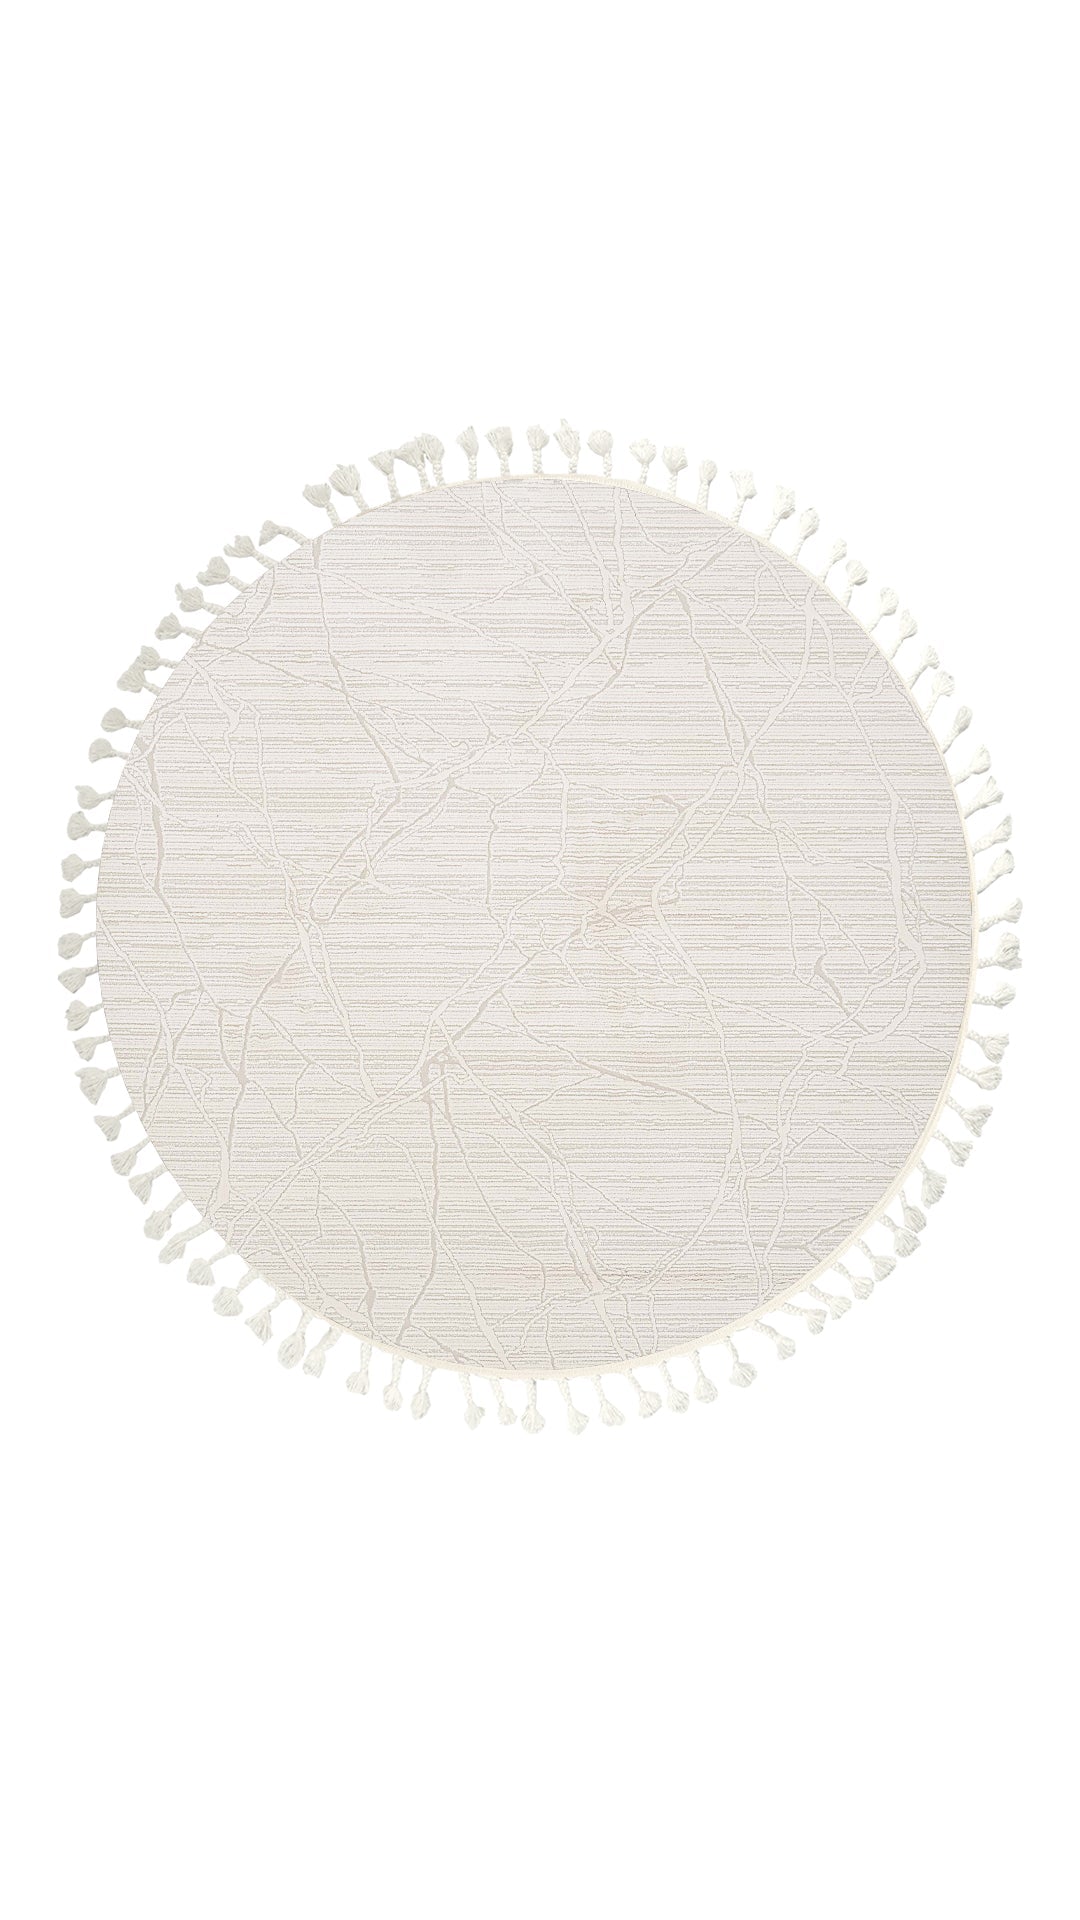 Dolce Vita Rug Monza 4203 Tangle Round Living Room Rug